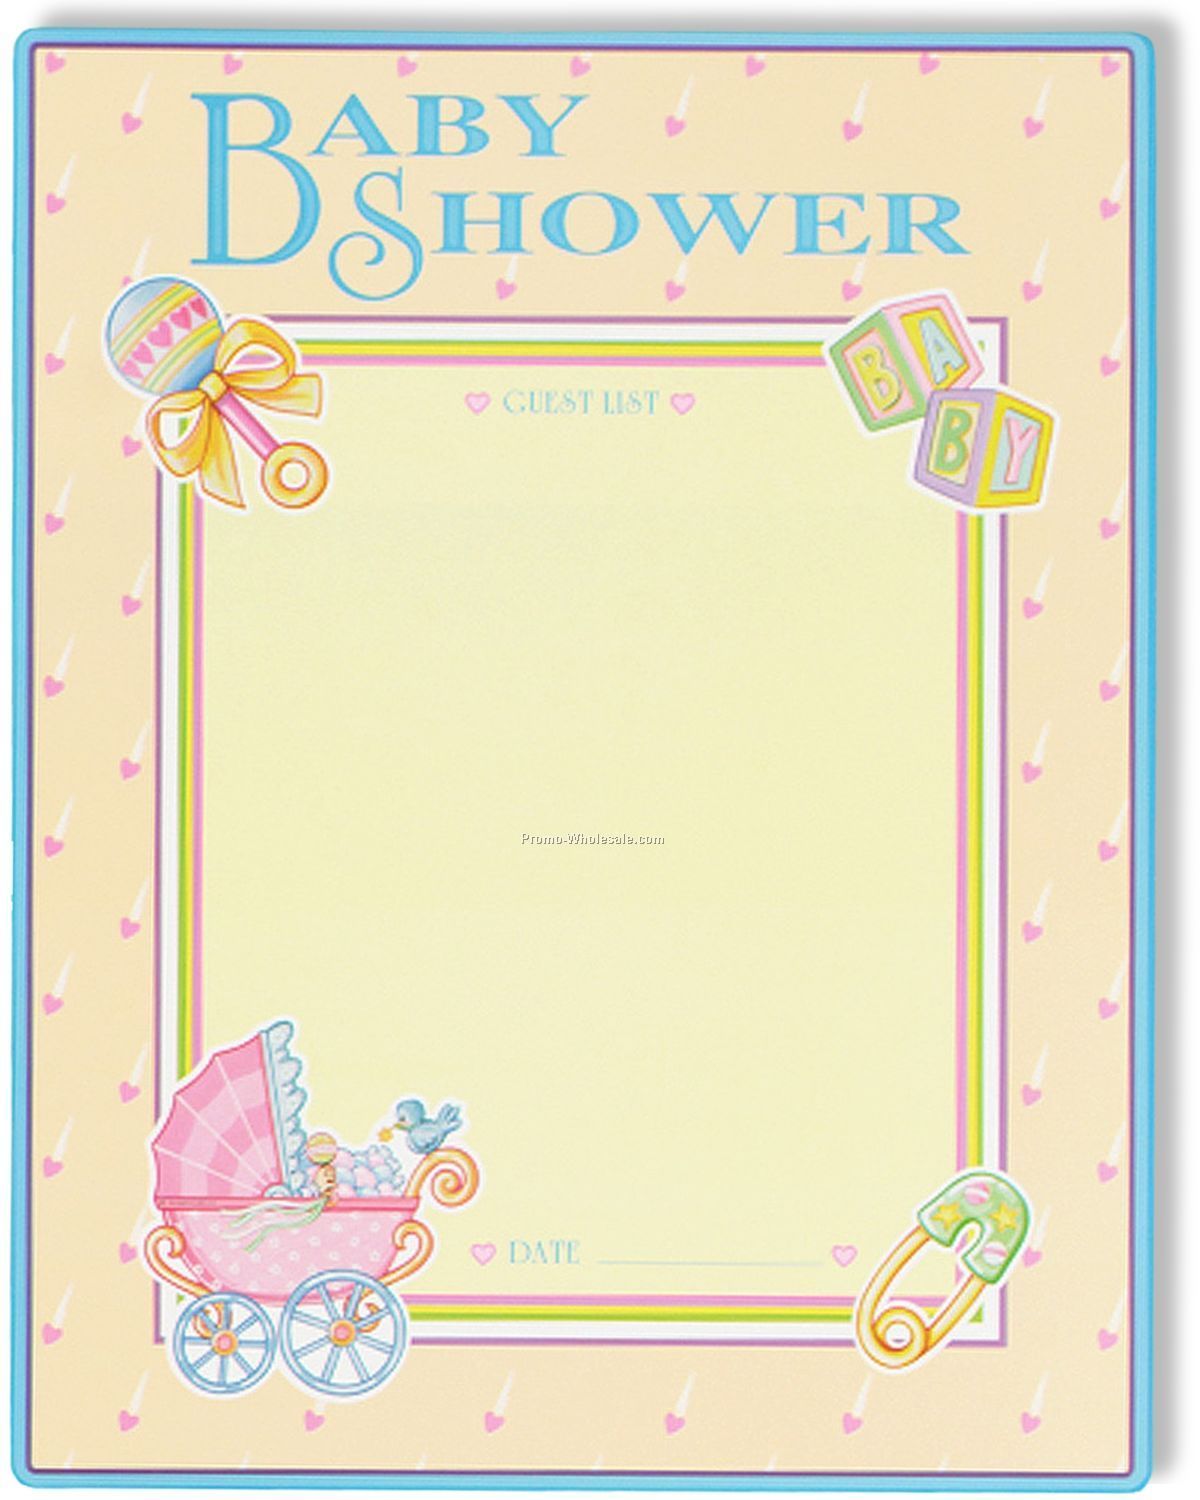 23"x18" Baby Shower Partygraph Poster